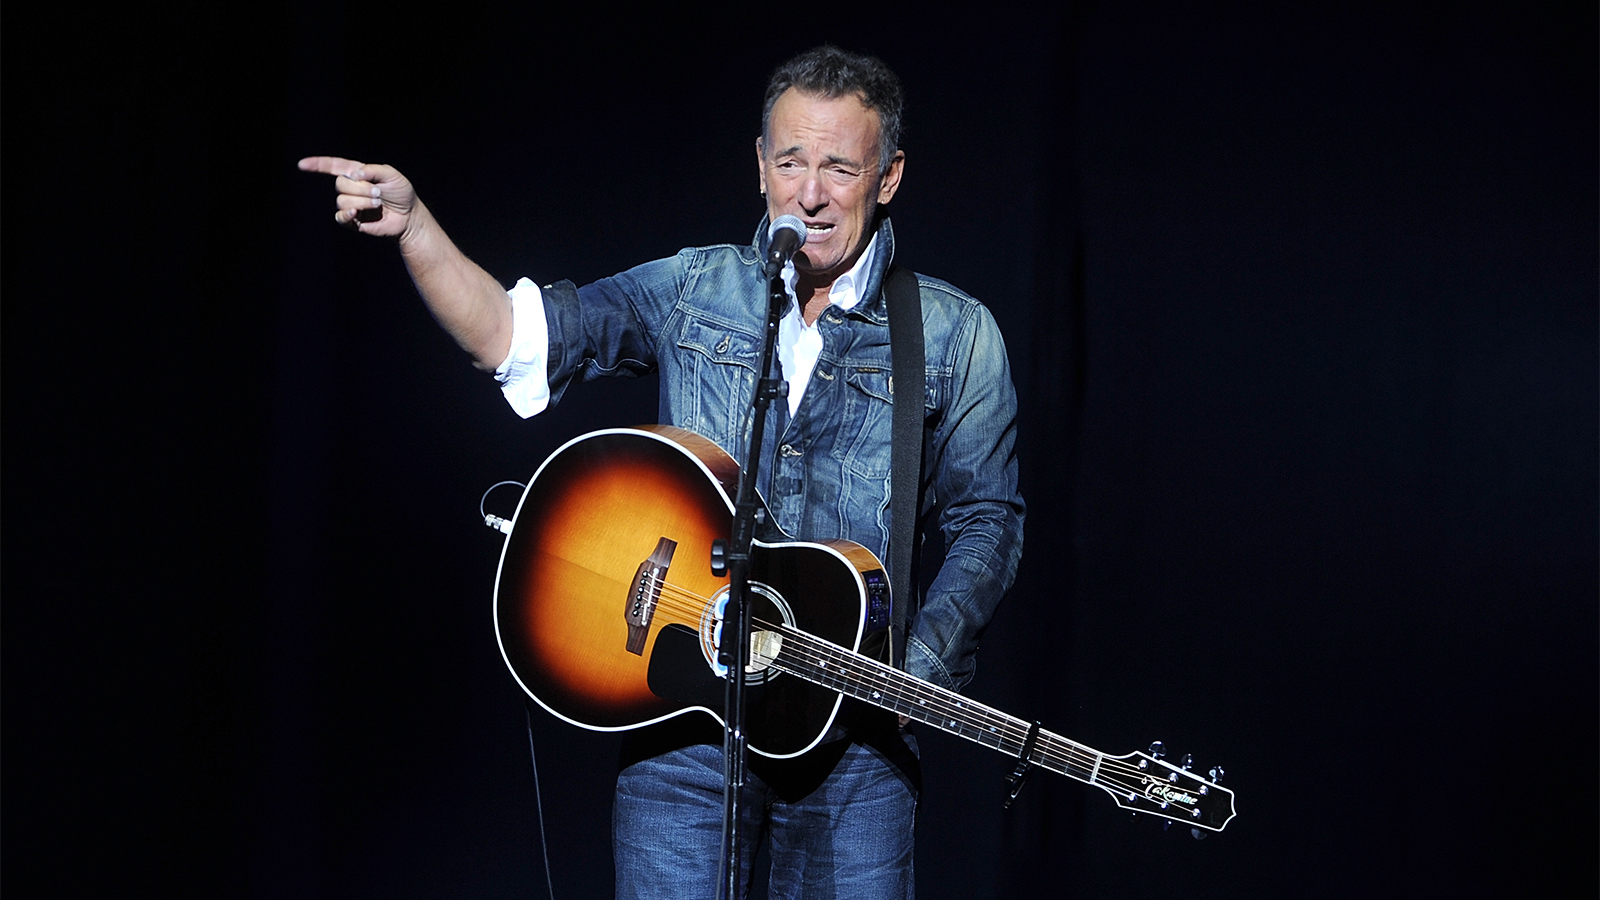 Bruce Springsteen performs at the 12th annual Stand Up For Heroes benefit concert at the Hulu Theater at Madison Square Garden on Nov. 5, 2018, in New York. (Photo by Brad Barket/Invision/AP)